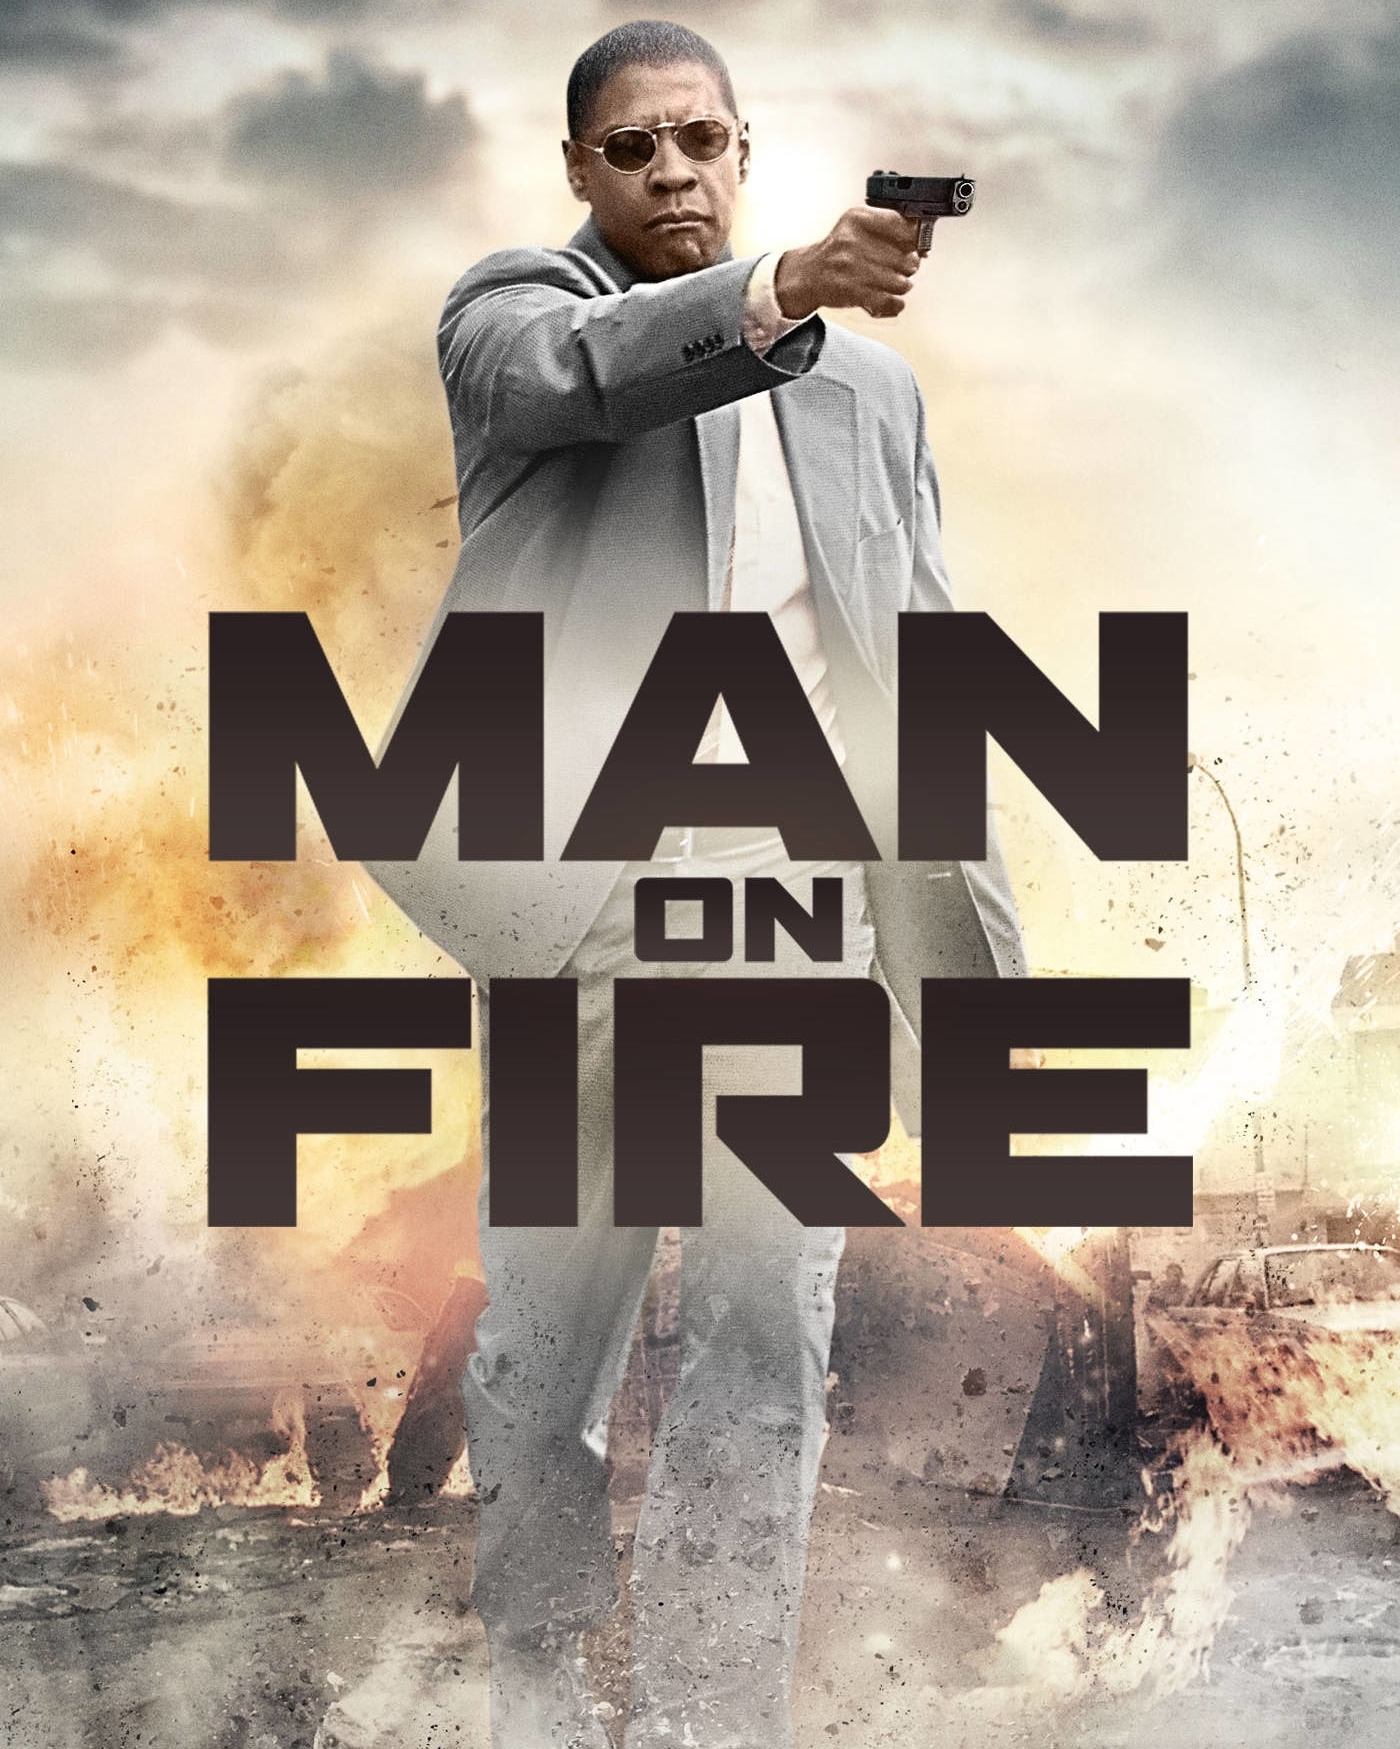 Man on fire: Movie review (No spoiler)